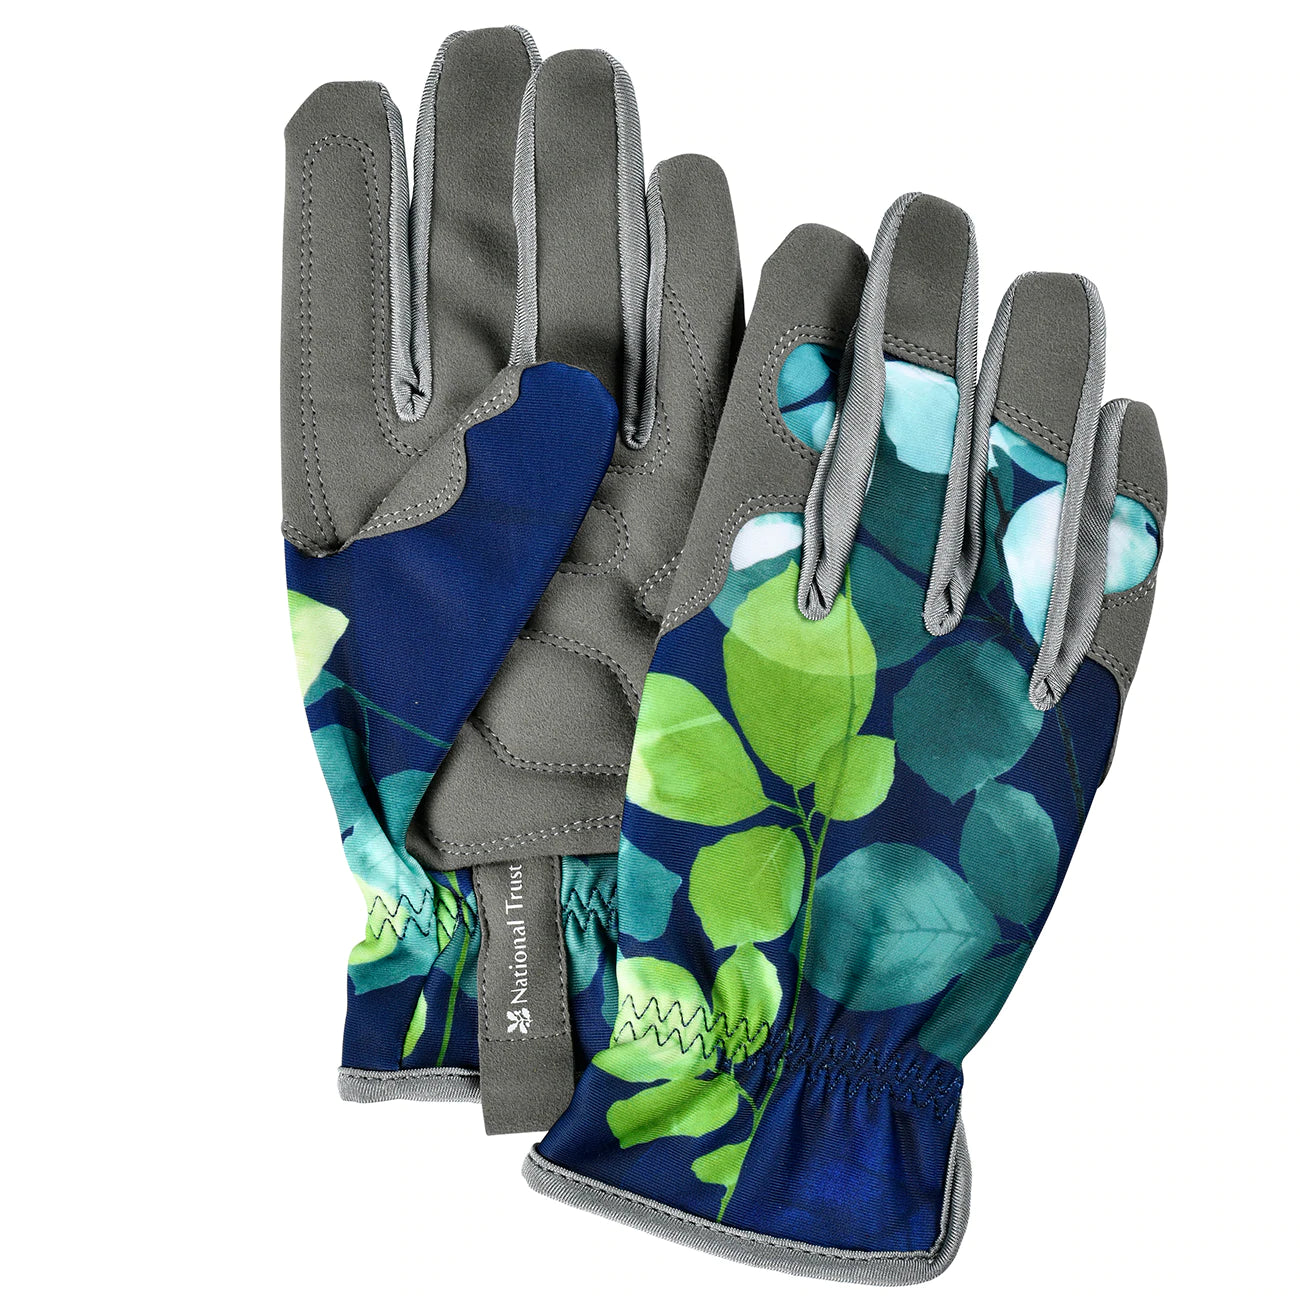 Burgon & Ball 'Under the Canopy' Collection Gardening Gloves